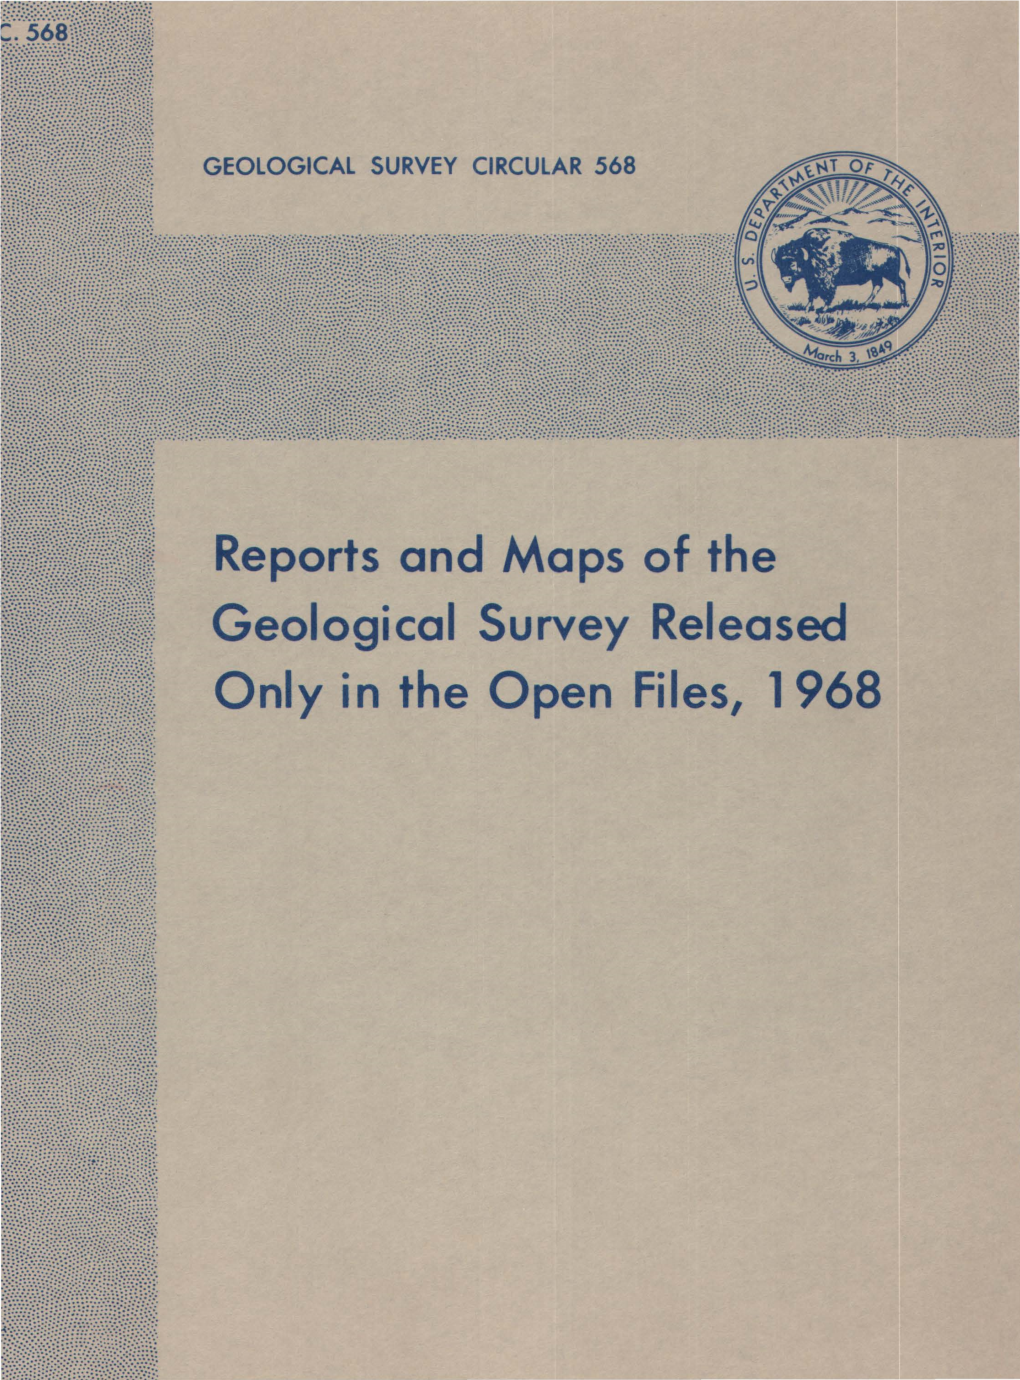 Reports and Maps of the Geological Survey Released Only in the Open Files, 1968